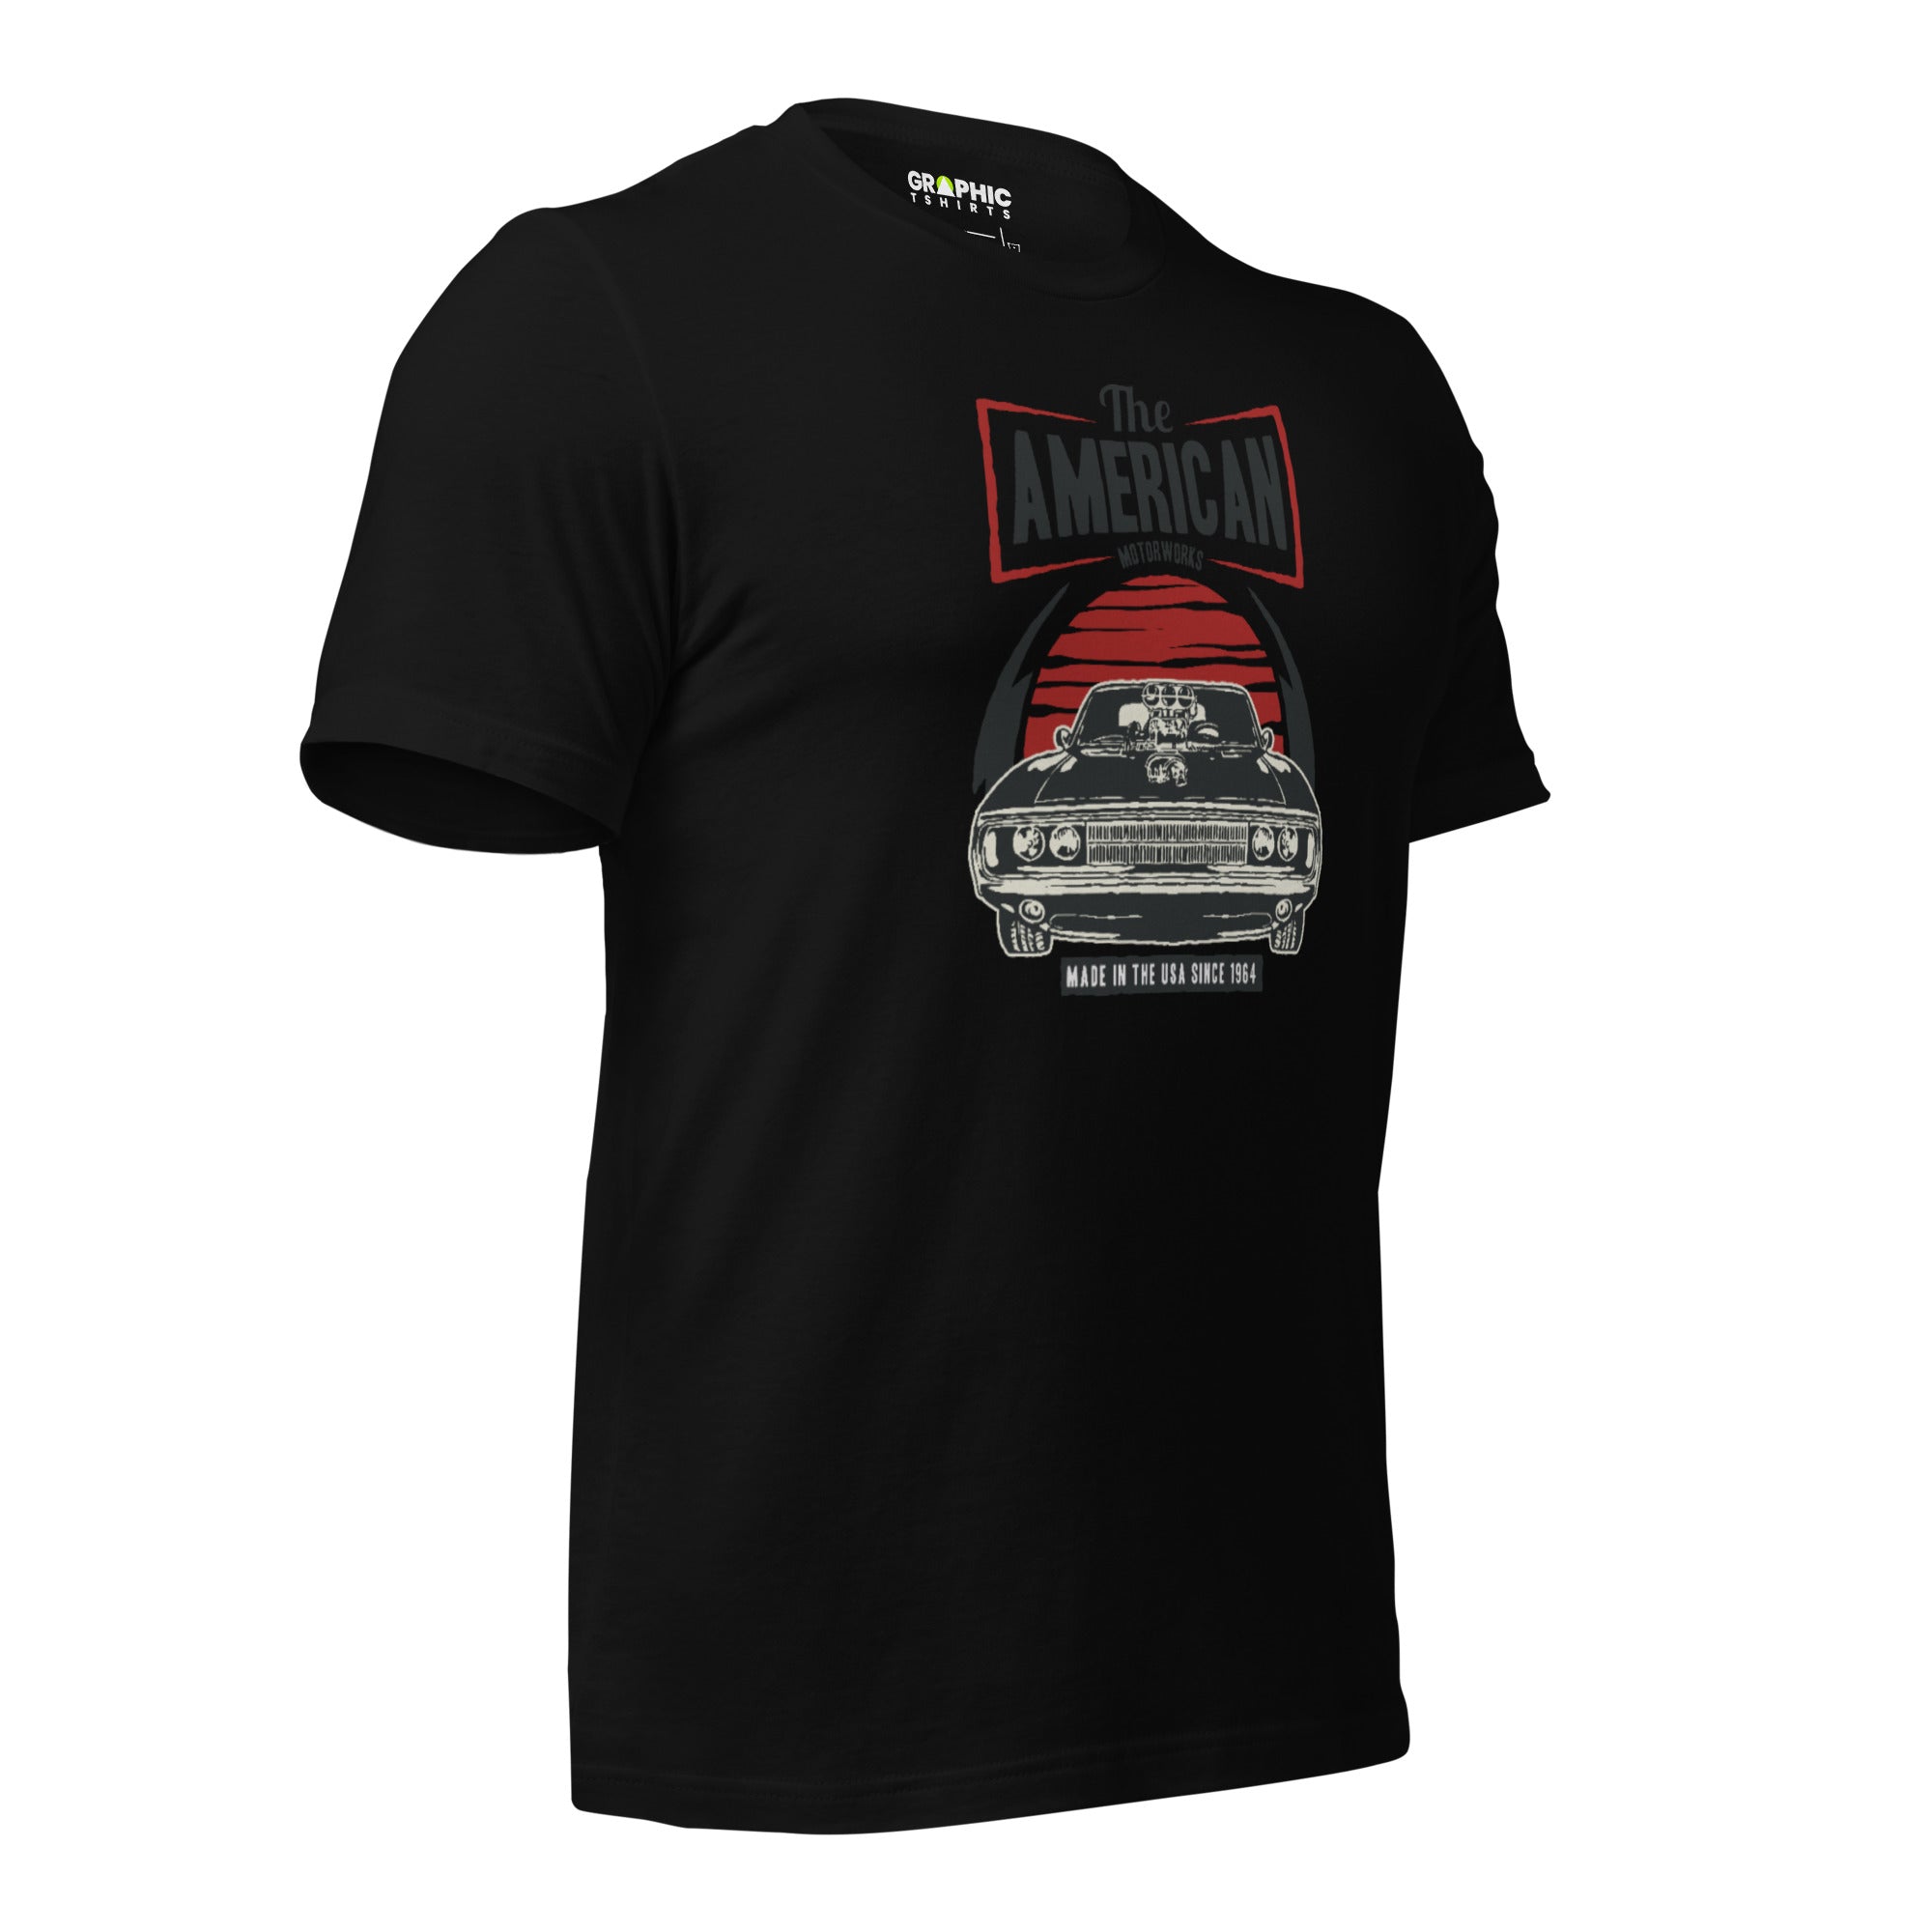 Unisex Staple T-Shirt - The American Motorworks Made In The USA Since 1964 - GRAPHIC T-SHIRTS